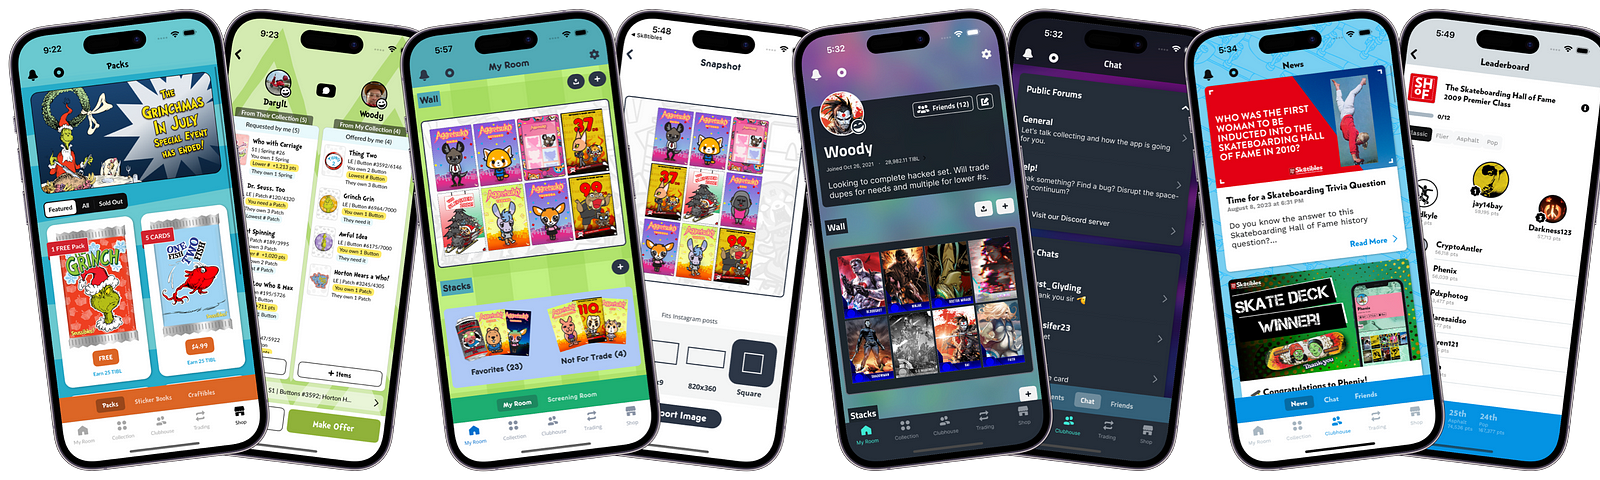 Multiple iOS apps for collecting and engaging with your fandoms.